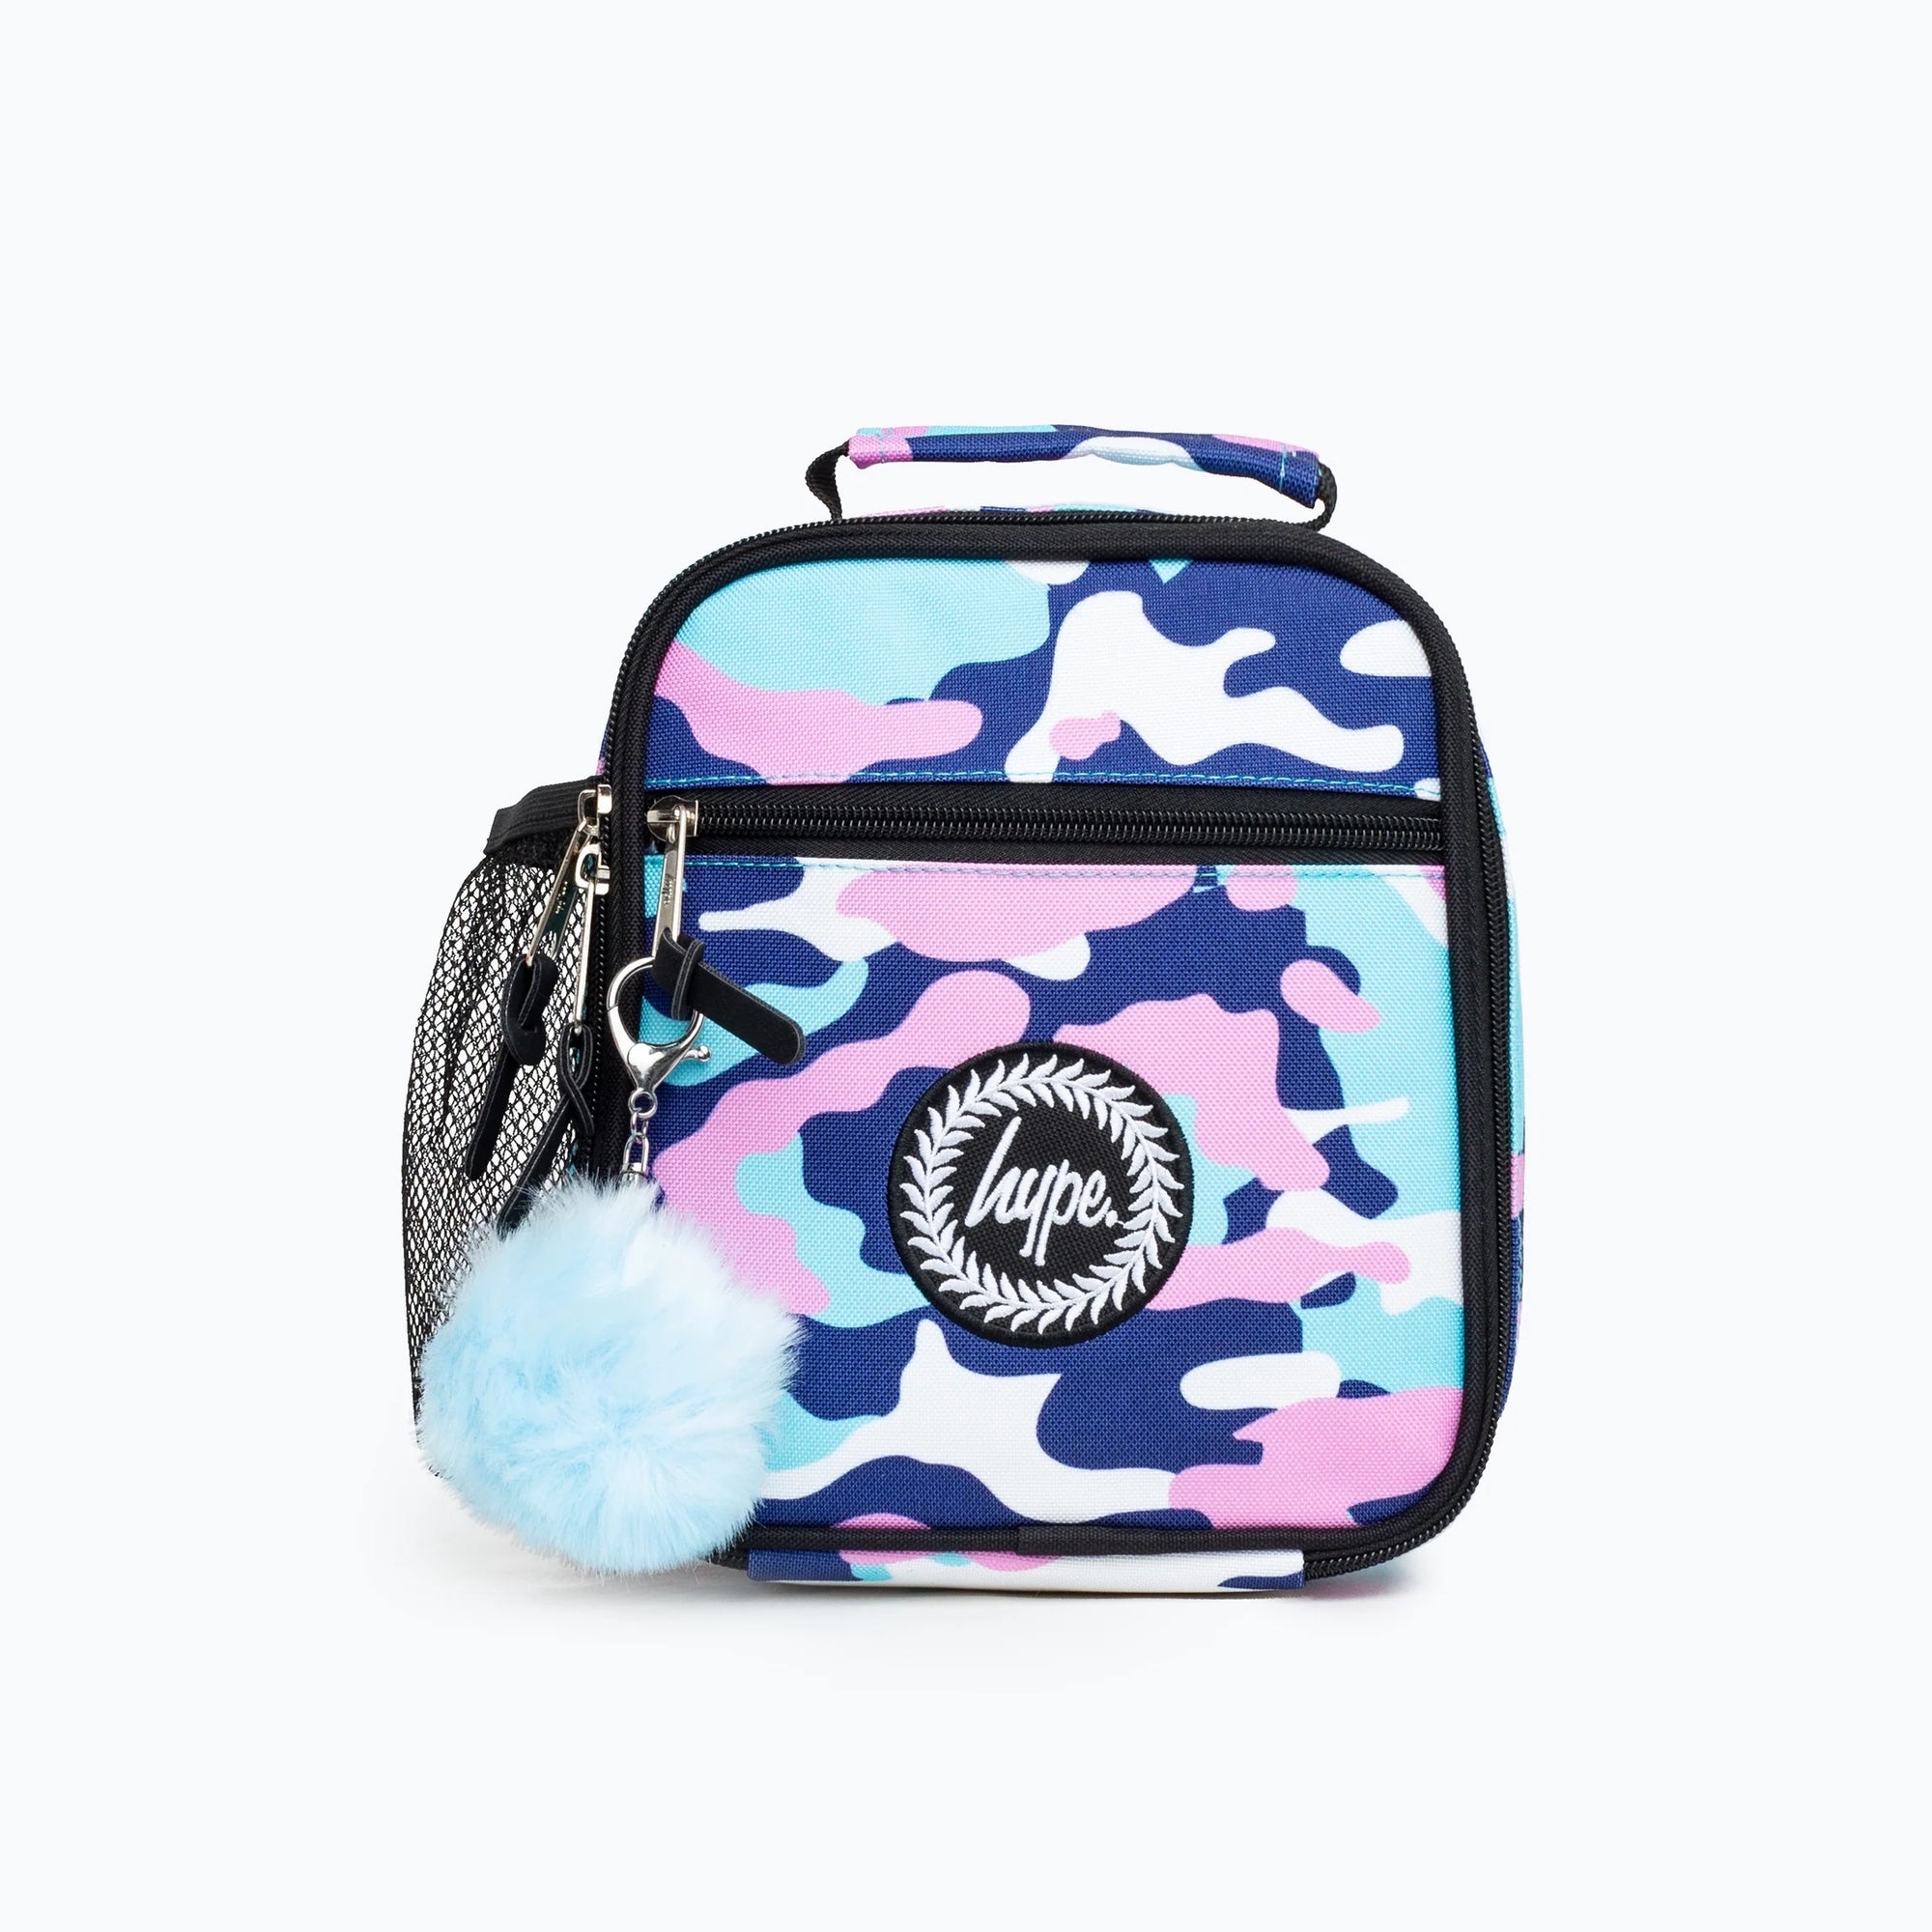 Hype Evie Camo Lunch Bag Bts20506 Accessories ONE SIZE / Multi